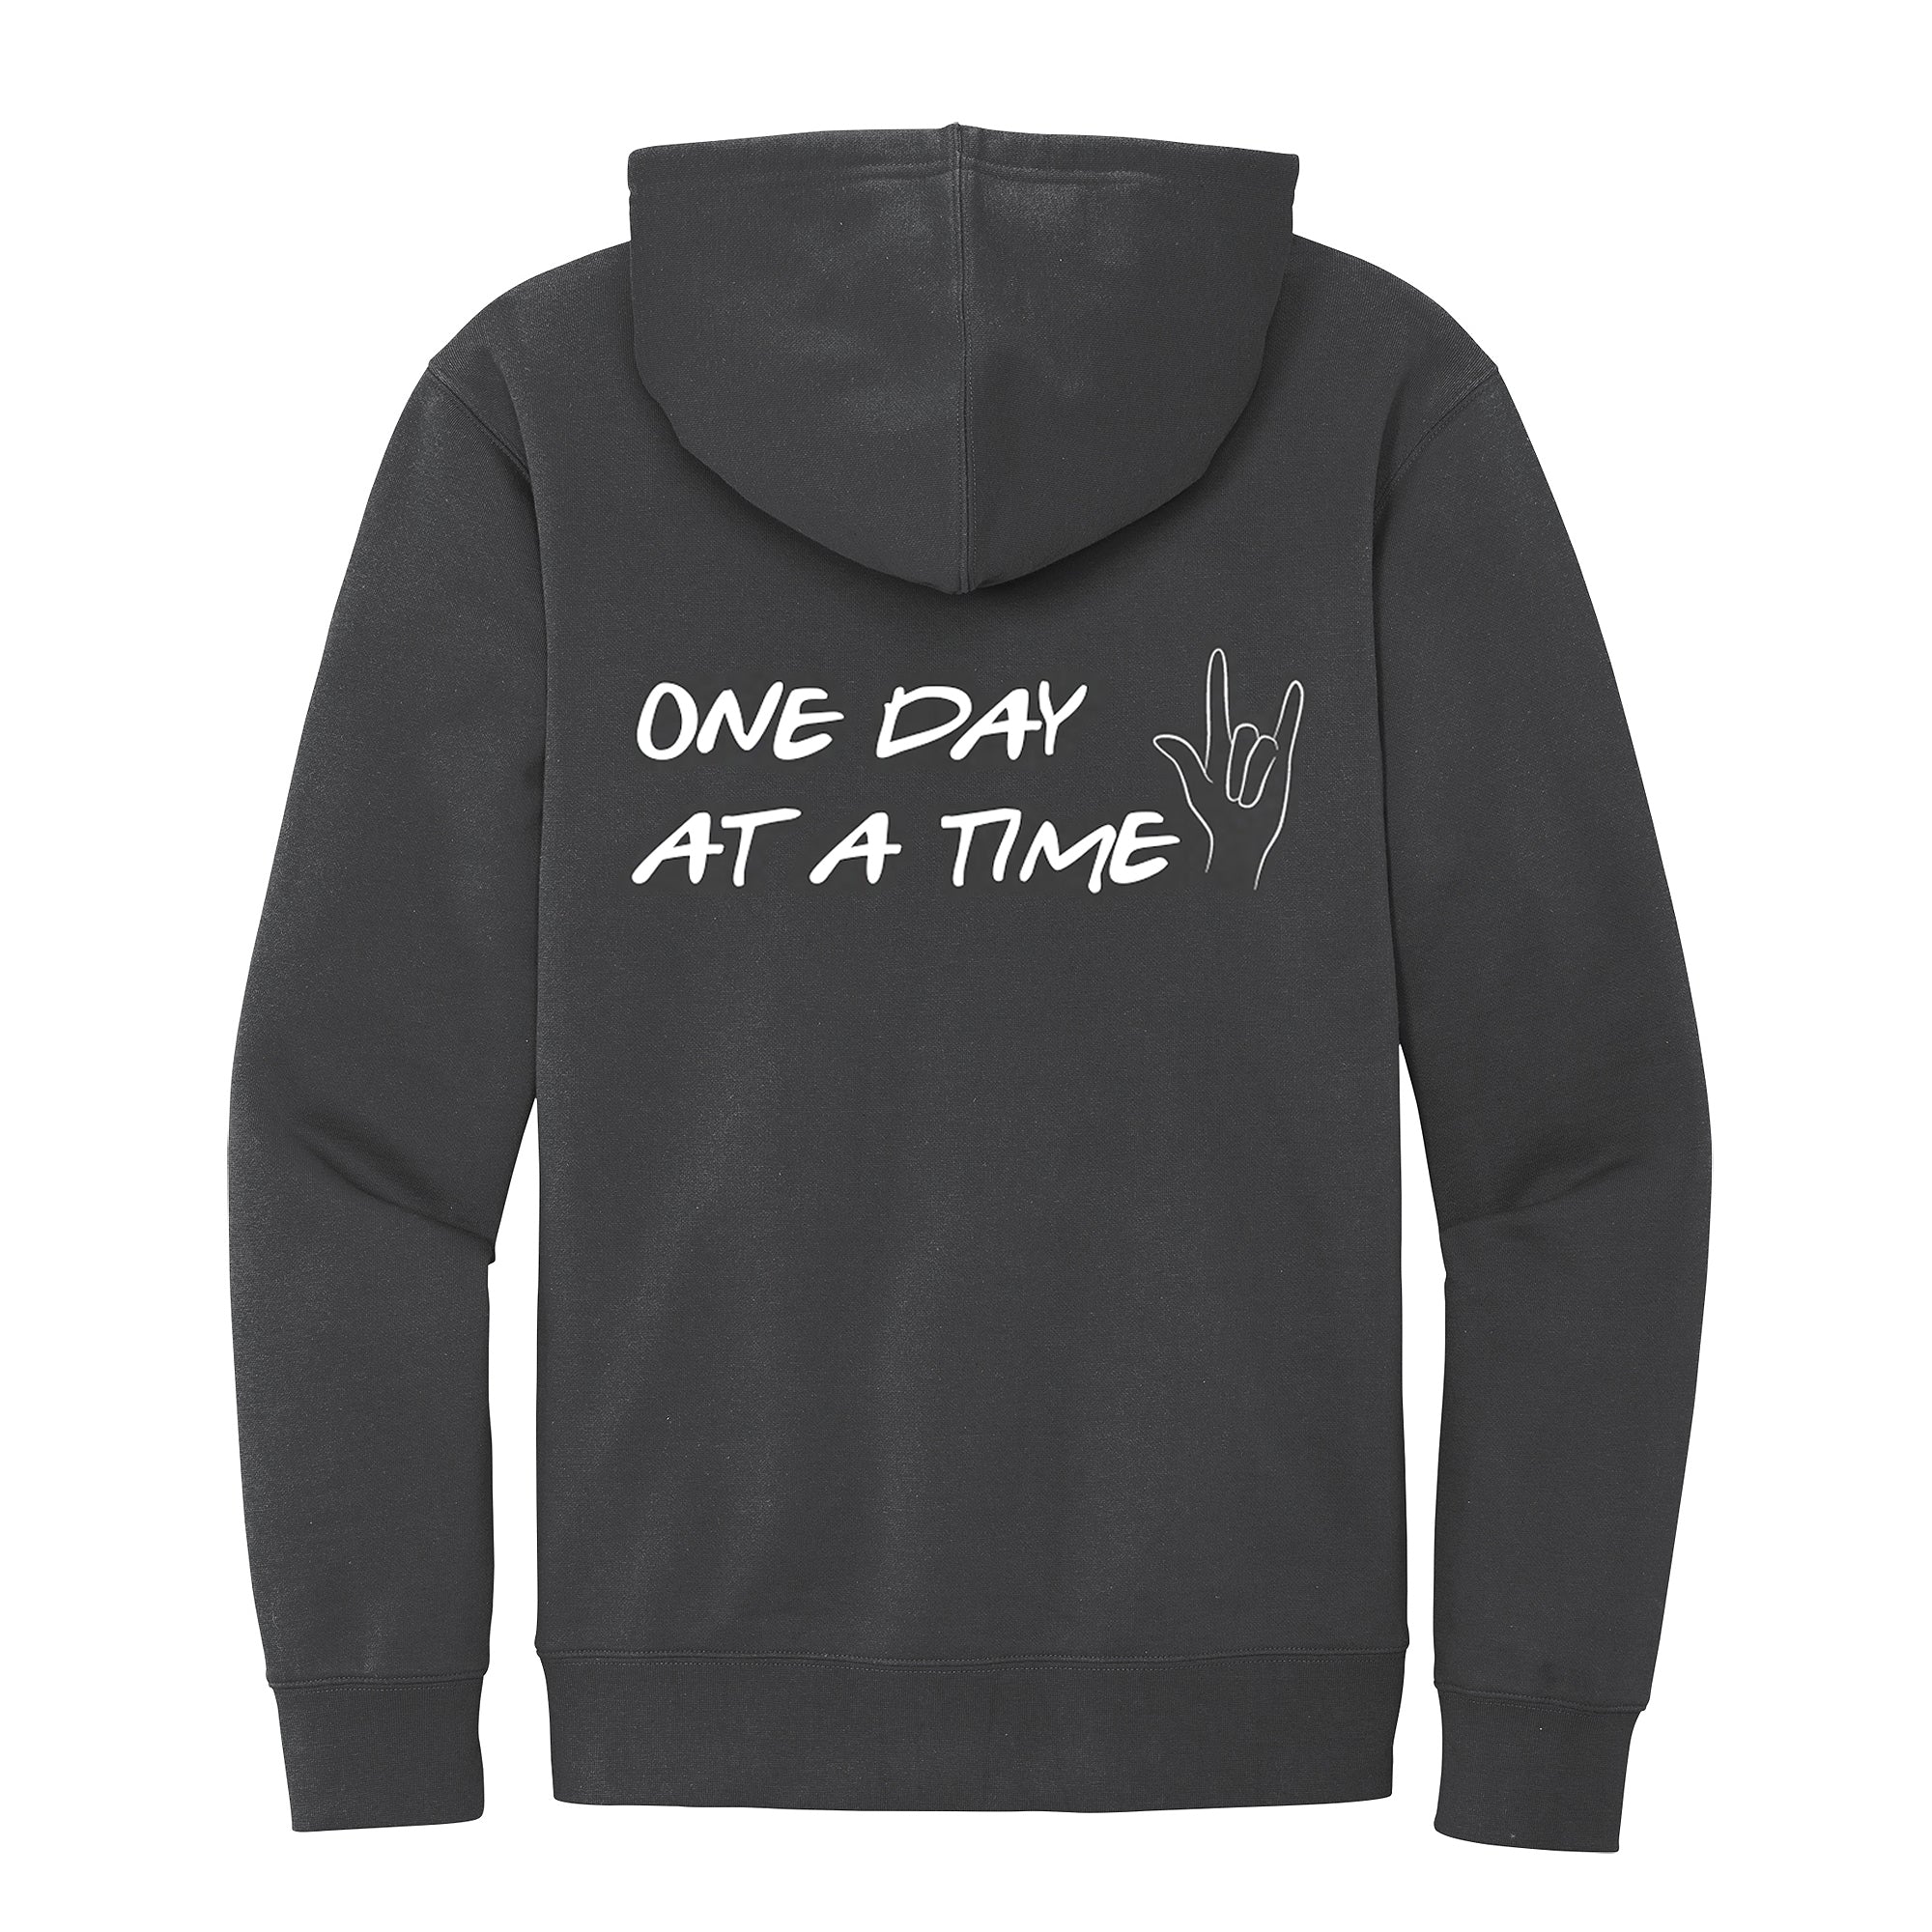 "One Day At A Time" Hoodie- Benefitting The National Eating Disorder Association